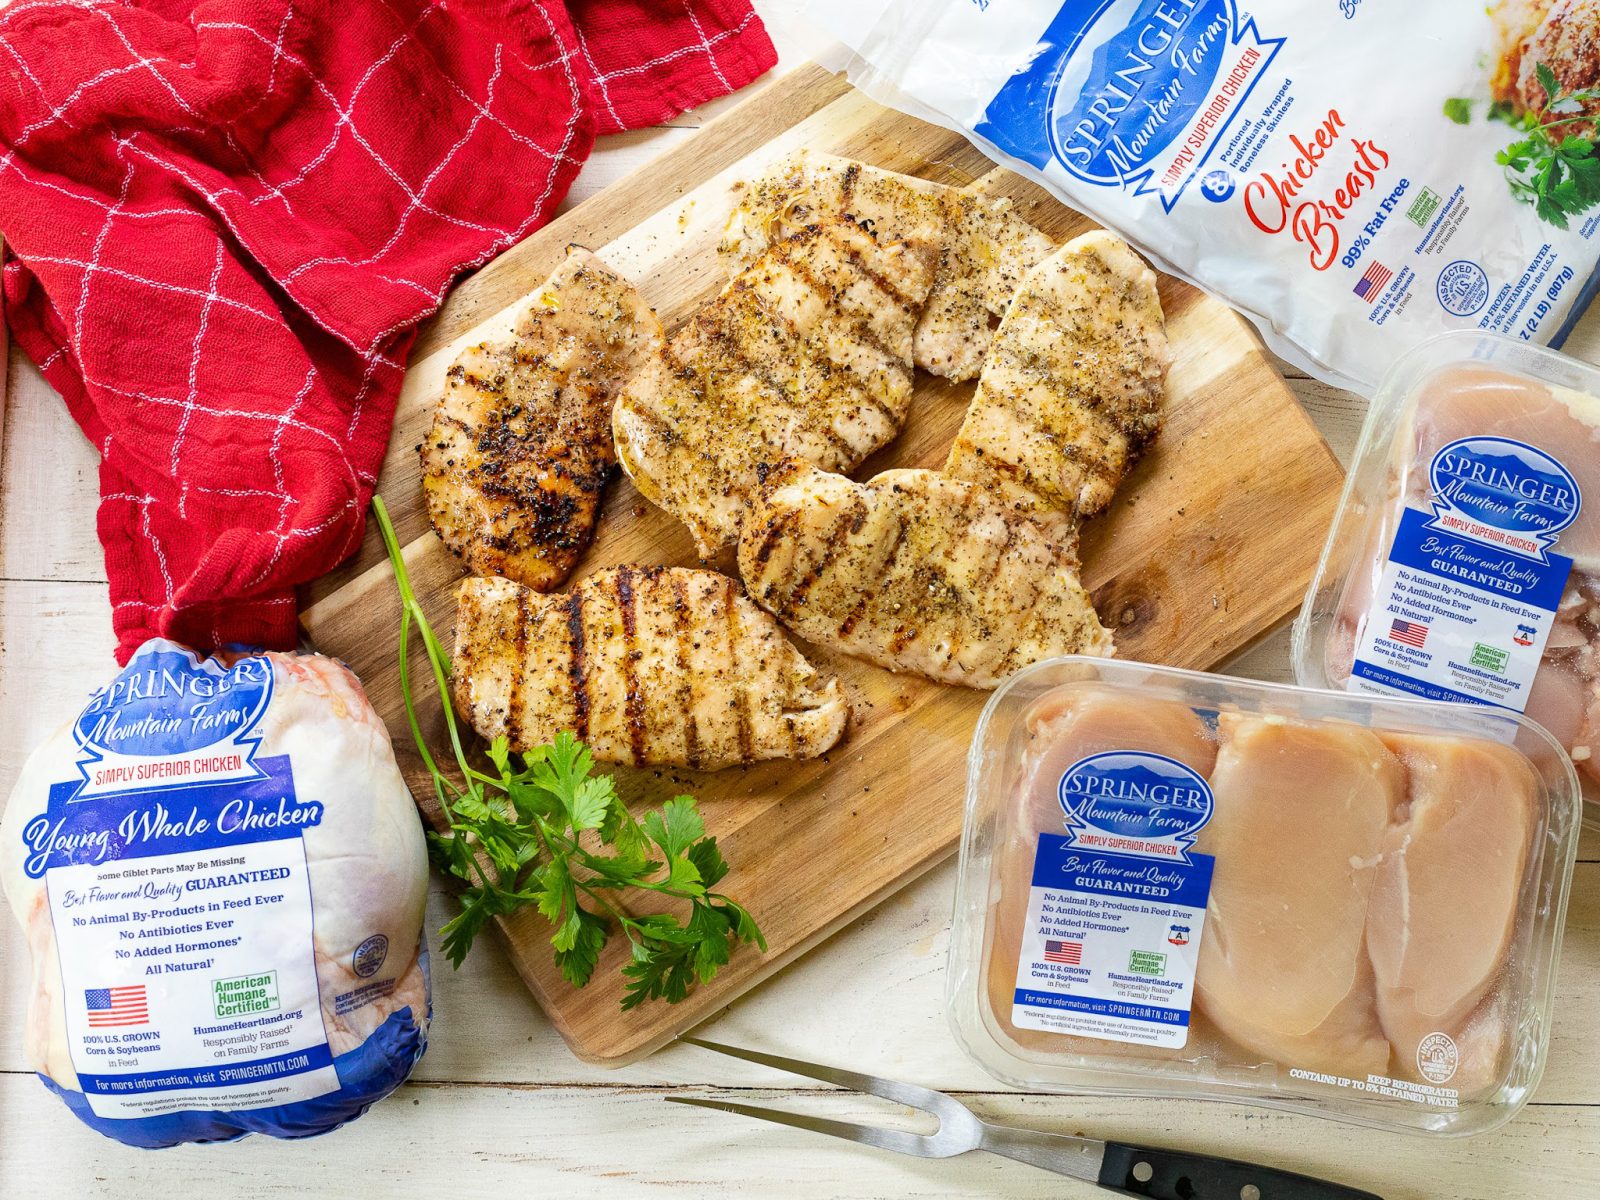 Springer Mountain Farms Chicken Is BOGO At Publix – Get The Best Flavor & Quality… Guaranteed!